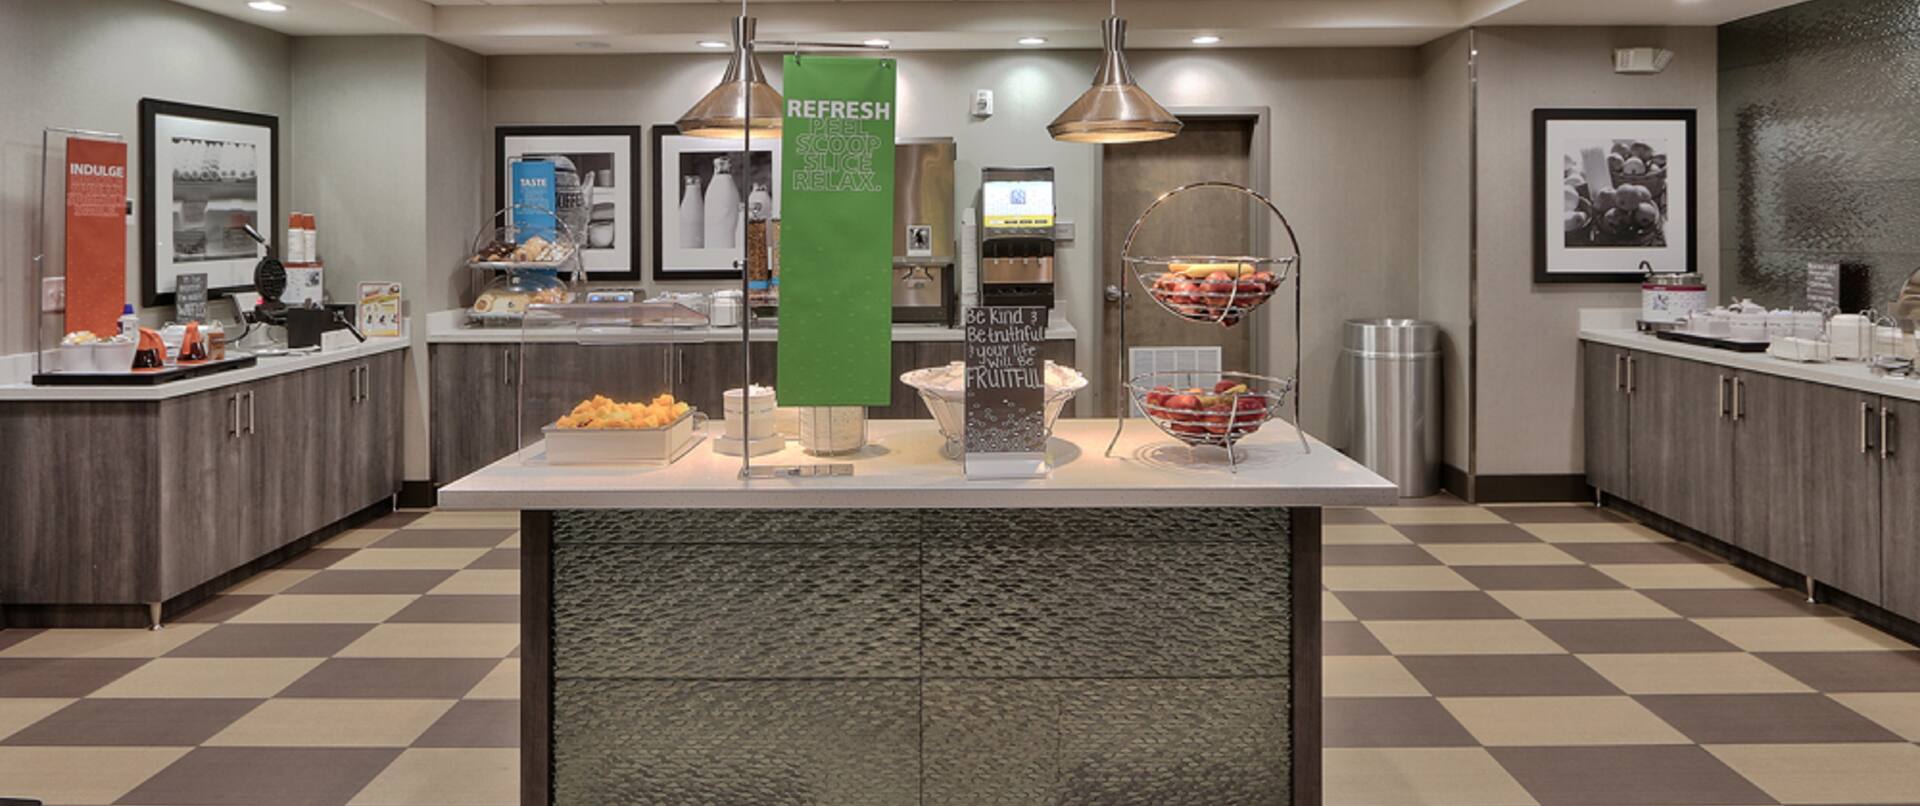 Breakfast Buffet Area with Fresh Fruit, Hot Items and More